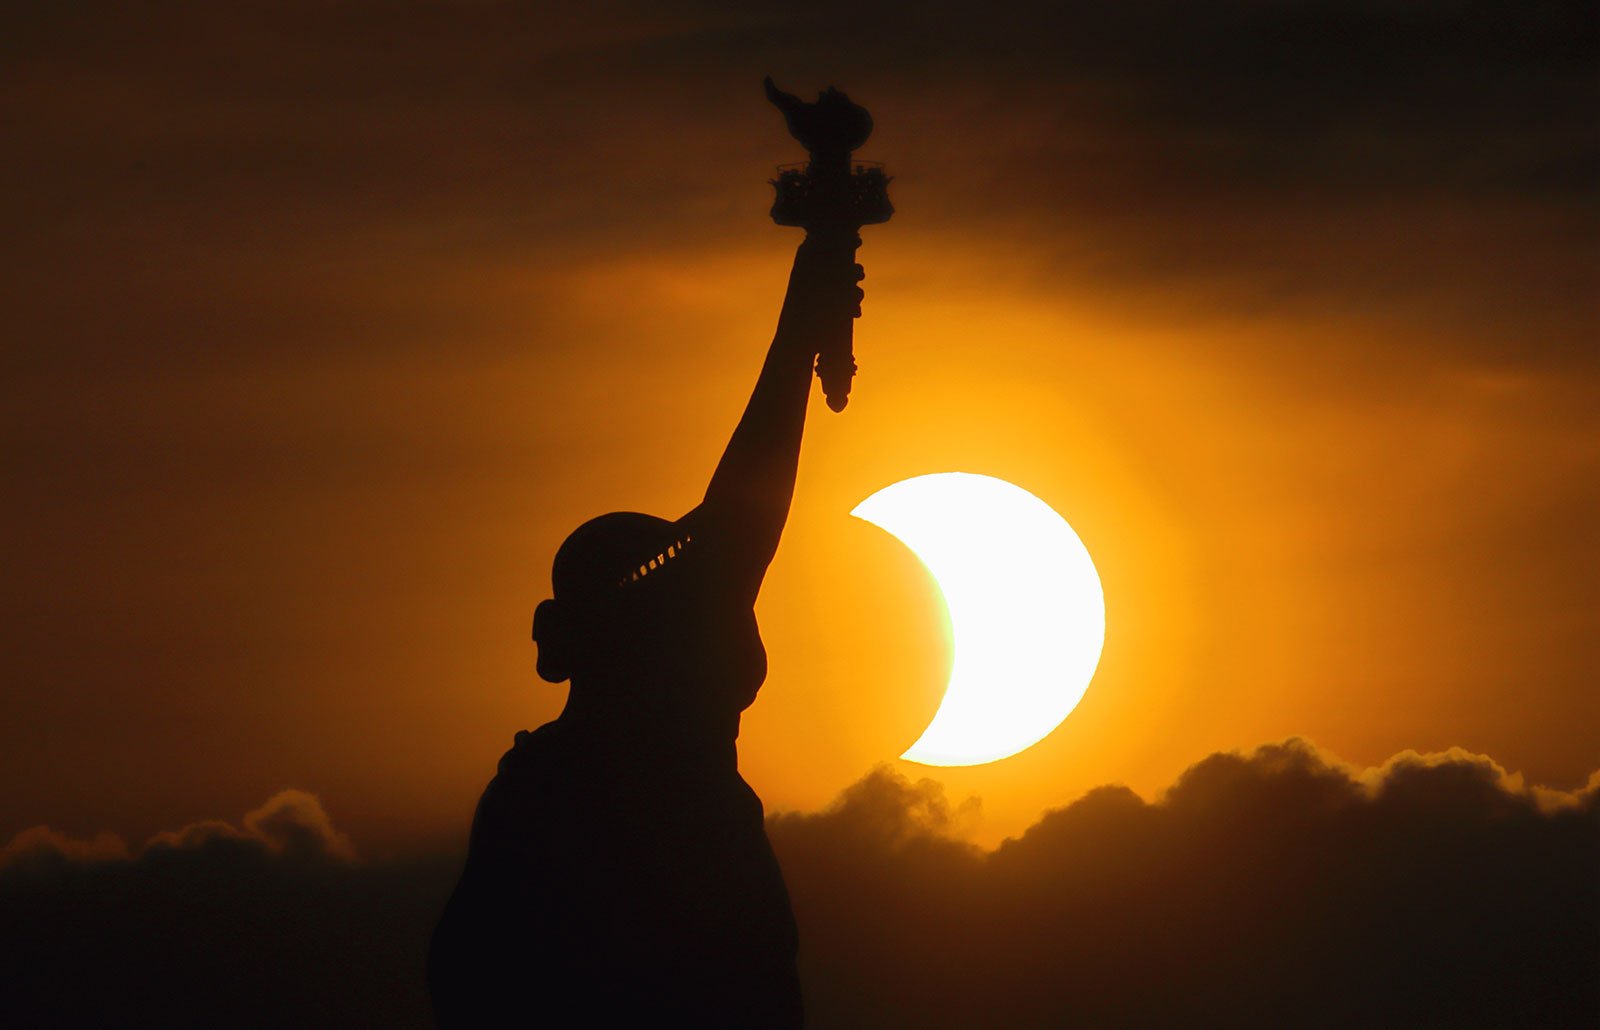 The Statue of Liberty and a solar eclipse in the background